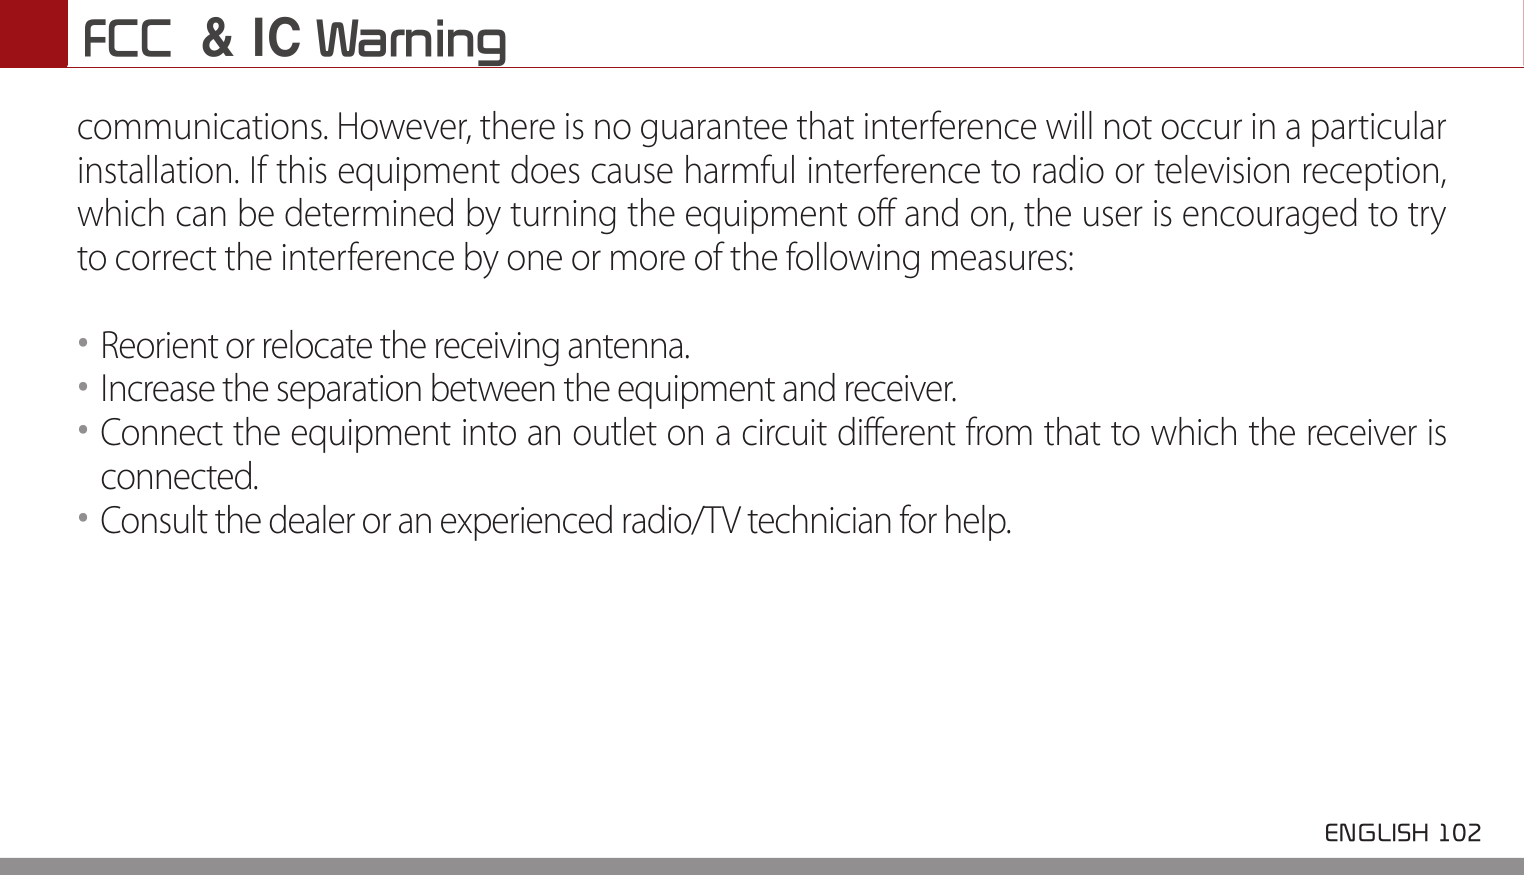 FCC  &amp; IC Warning ENGLISH 102 communications. However, there is no guarantee that interference will not occur in a particular installation. If this equipment does cause harmful interference to radio or television reception, which can be determined by turning the equipment off and on, the user is encouraged to try to correct the interference by one or more of the following measures:••Reorient or relocate the receiving antenna.••Increase the separation between the equipment and receiver.••Connect the equipment into an outlet on a circuit different from that to which the receiver isconnected.••Consult the dealer or an experienced radio/TV technician for help.